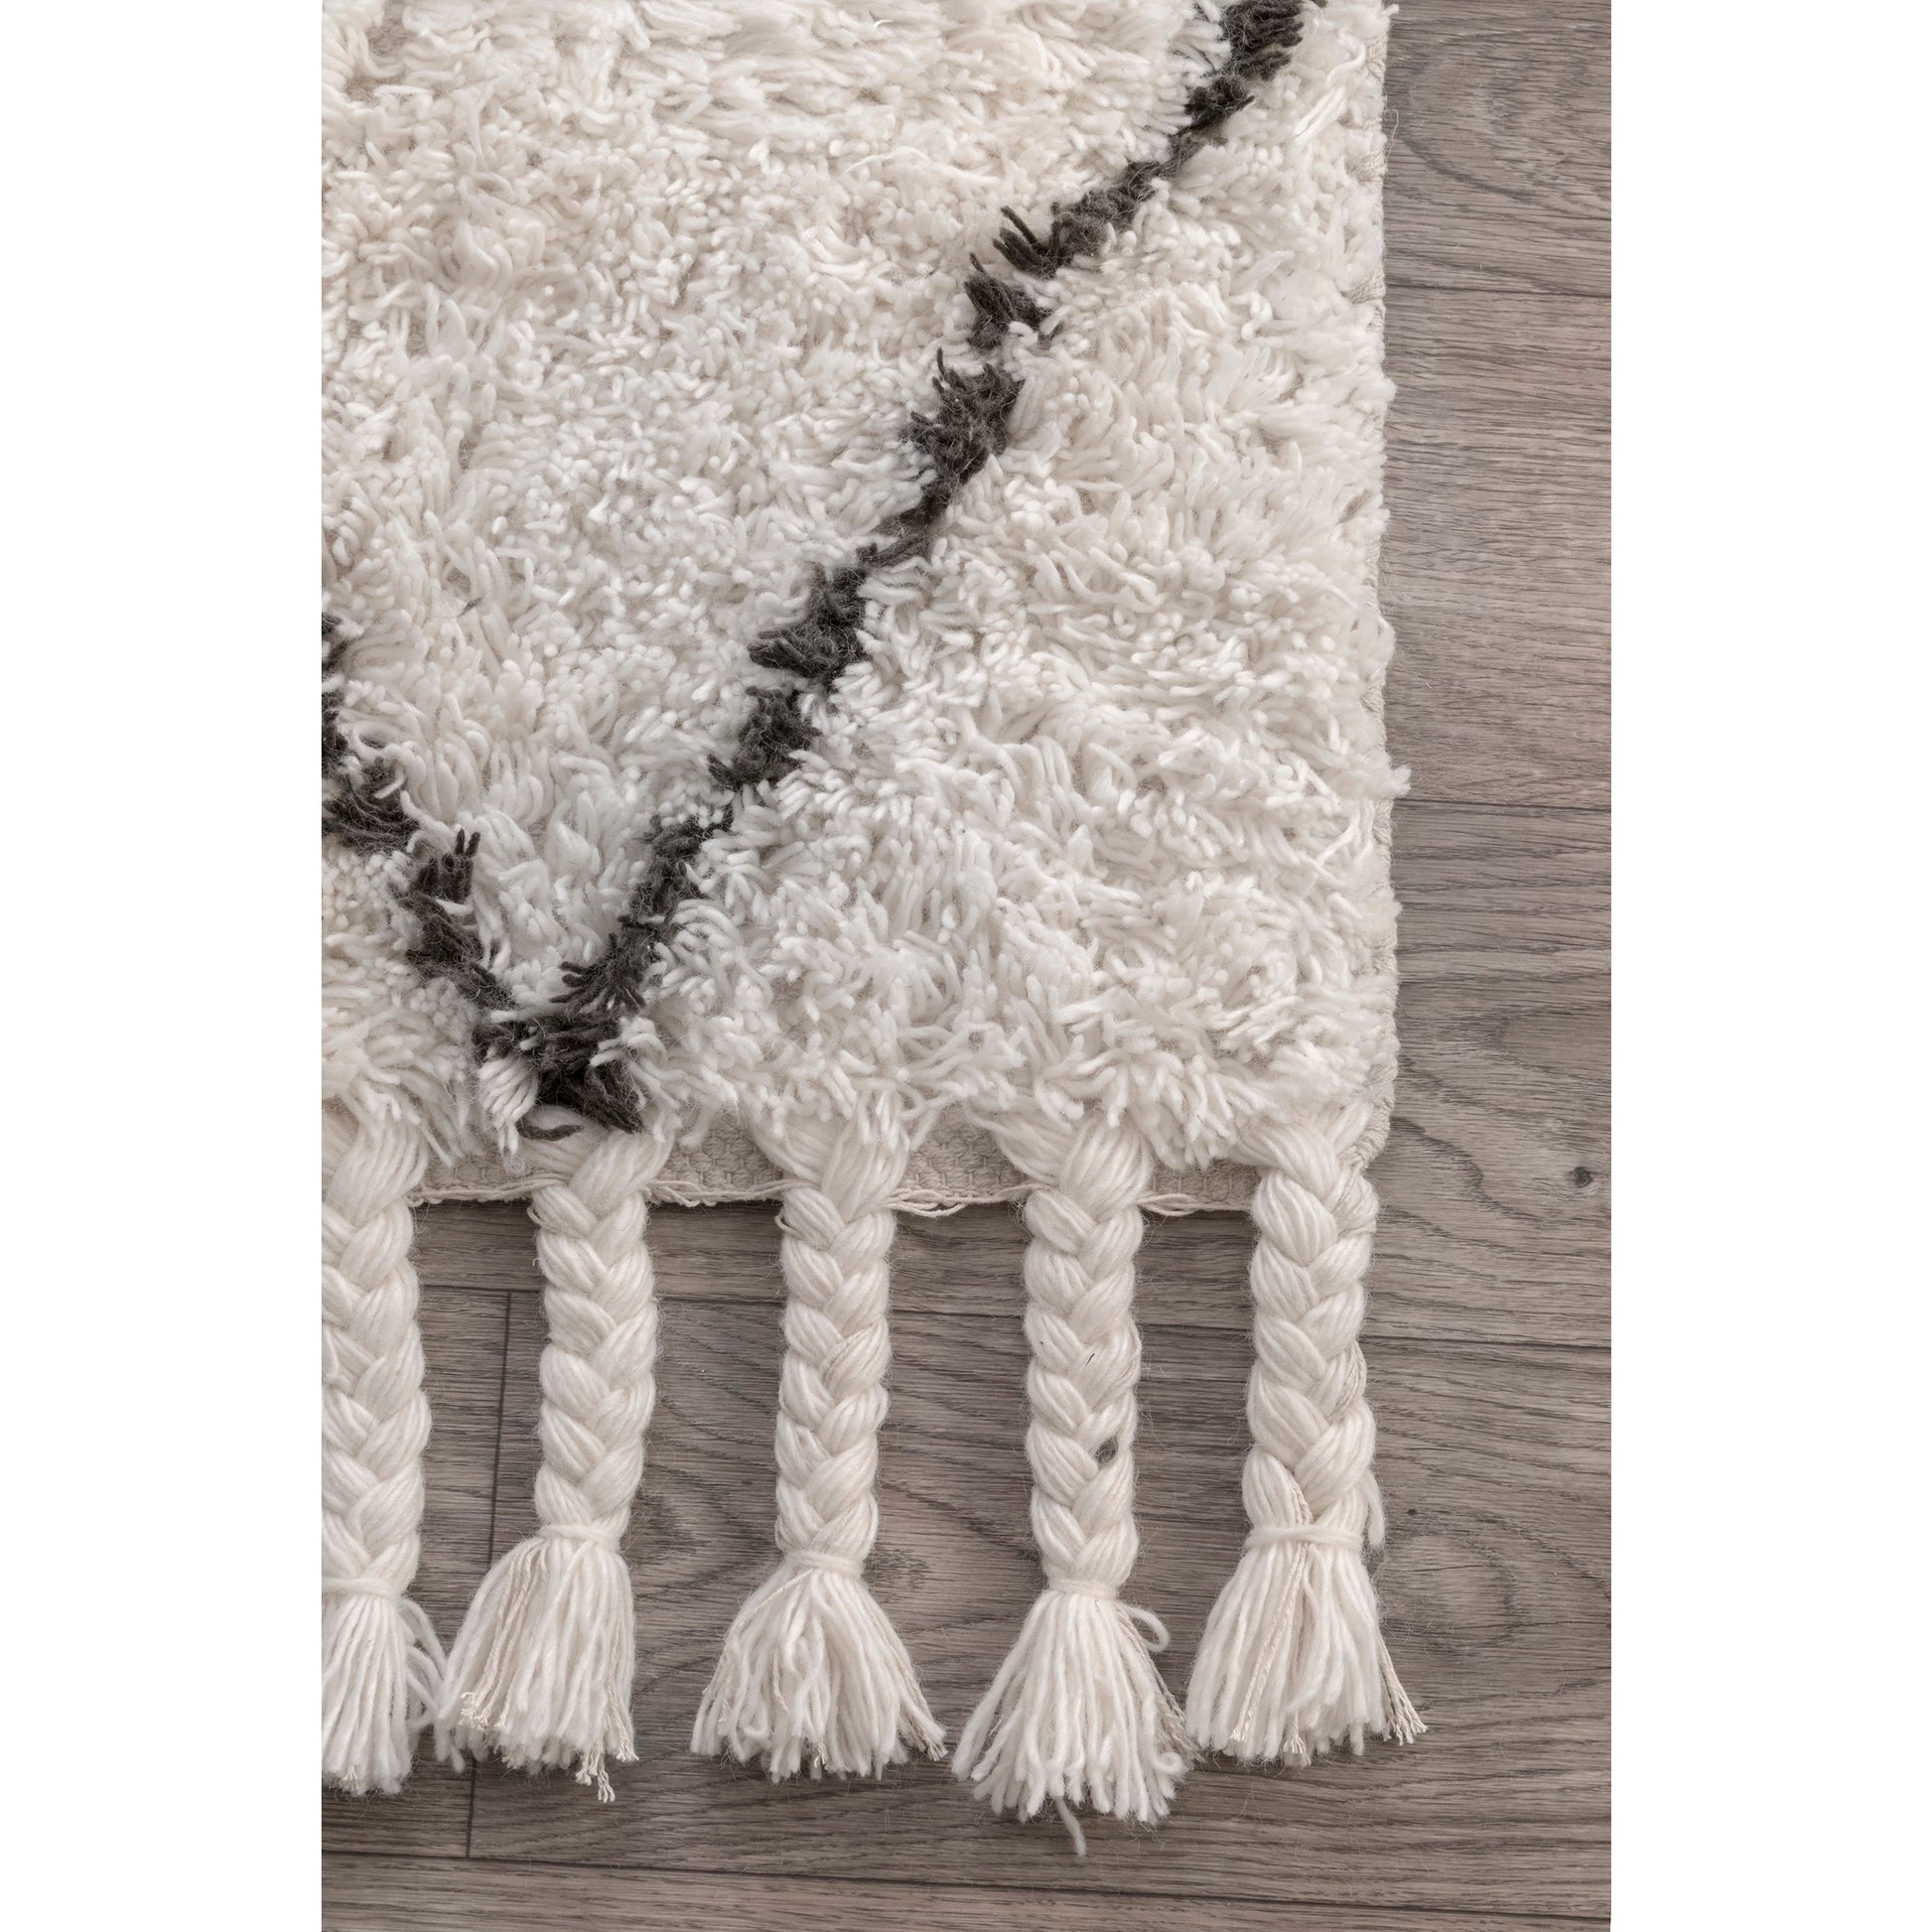 Nuloom Knotted Fez Spre14A Natural Area Rug